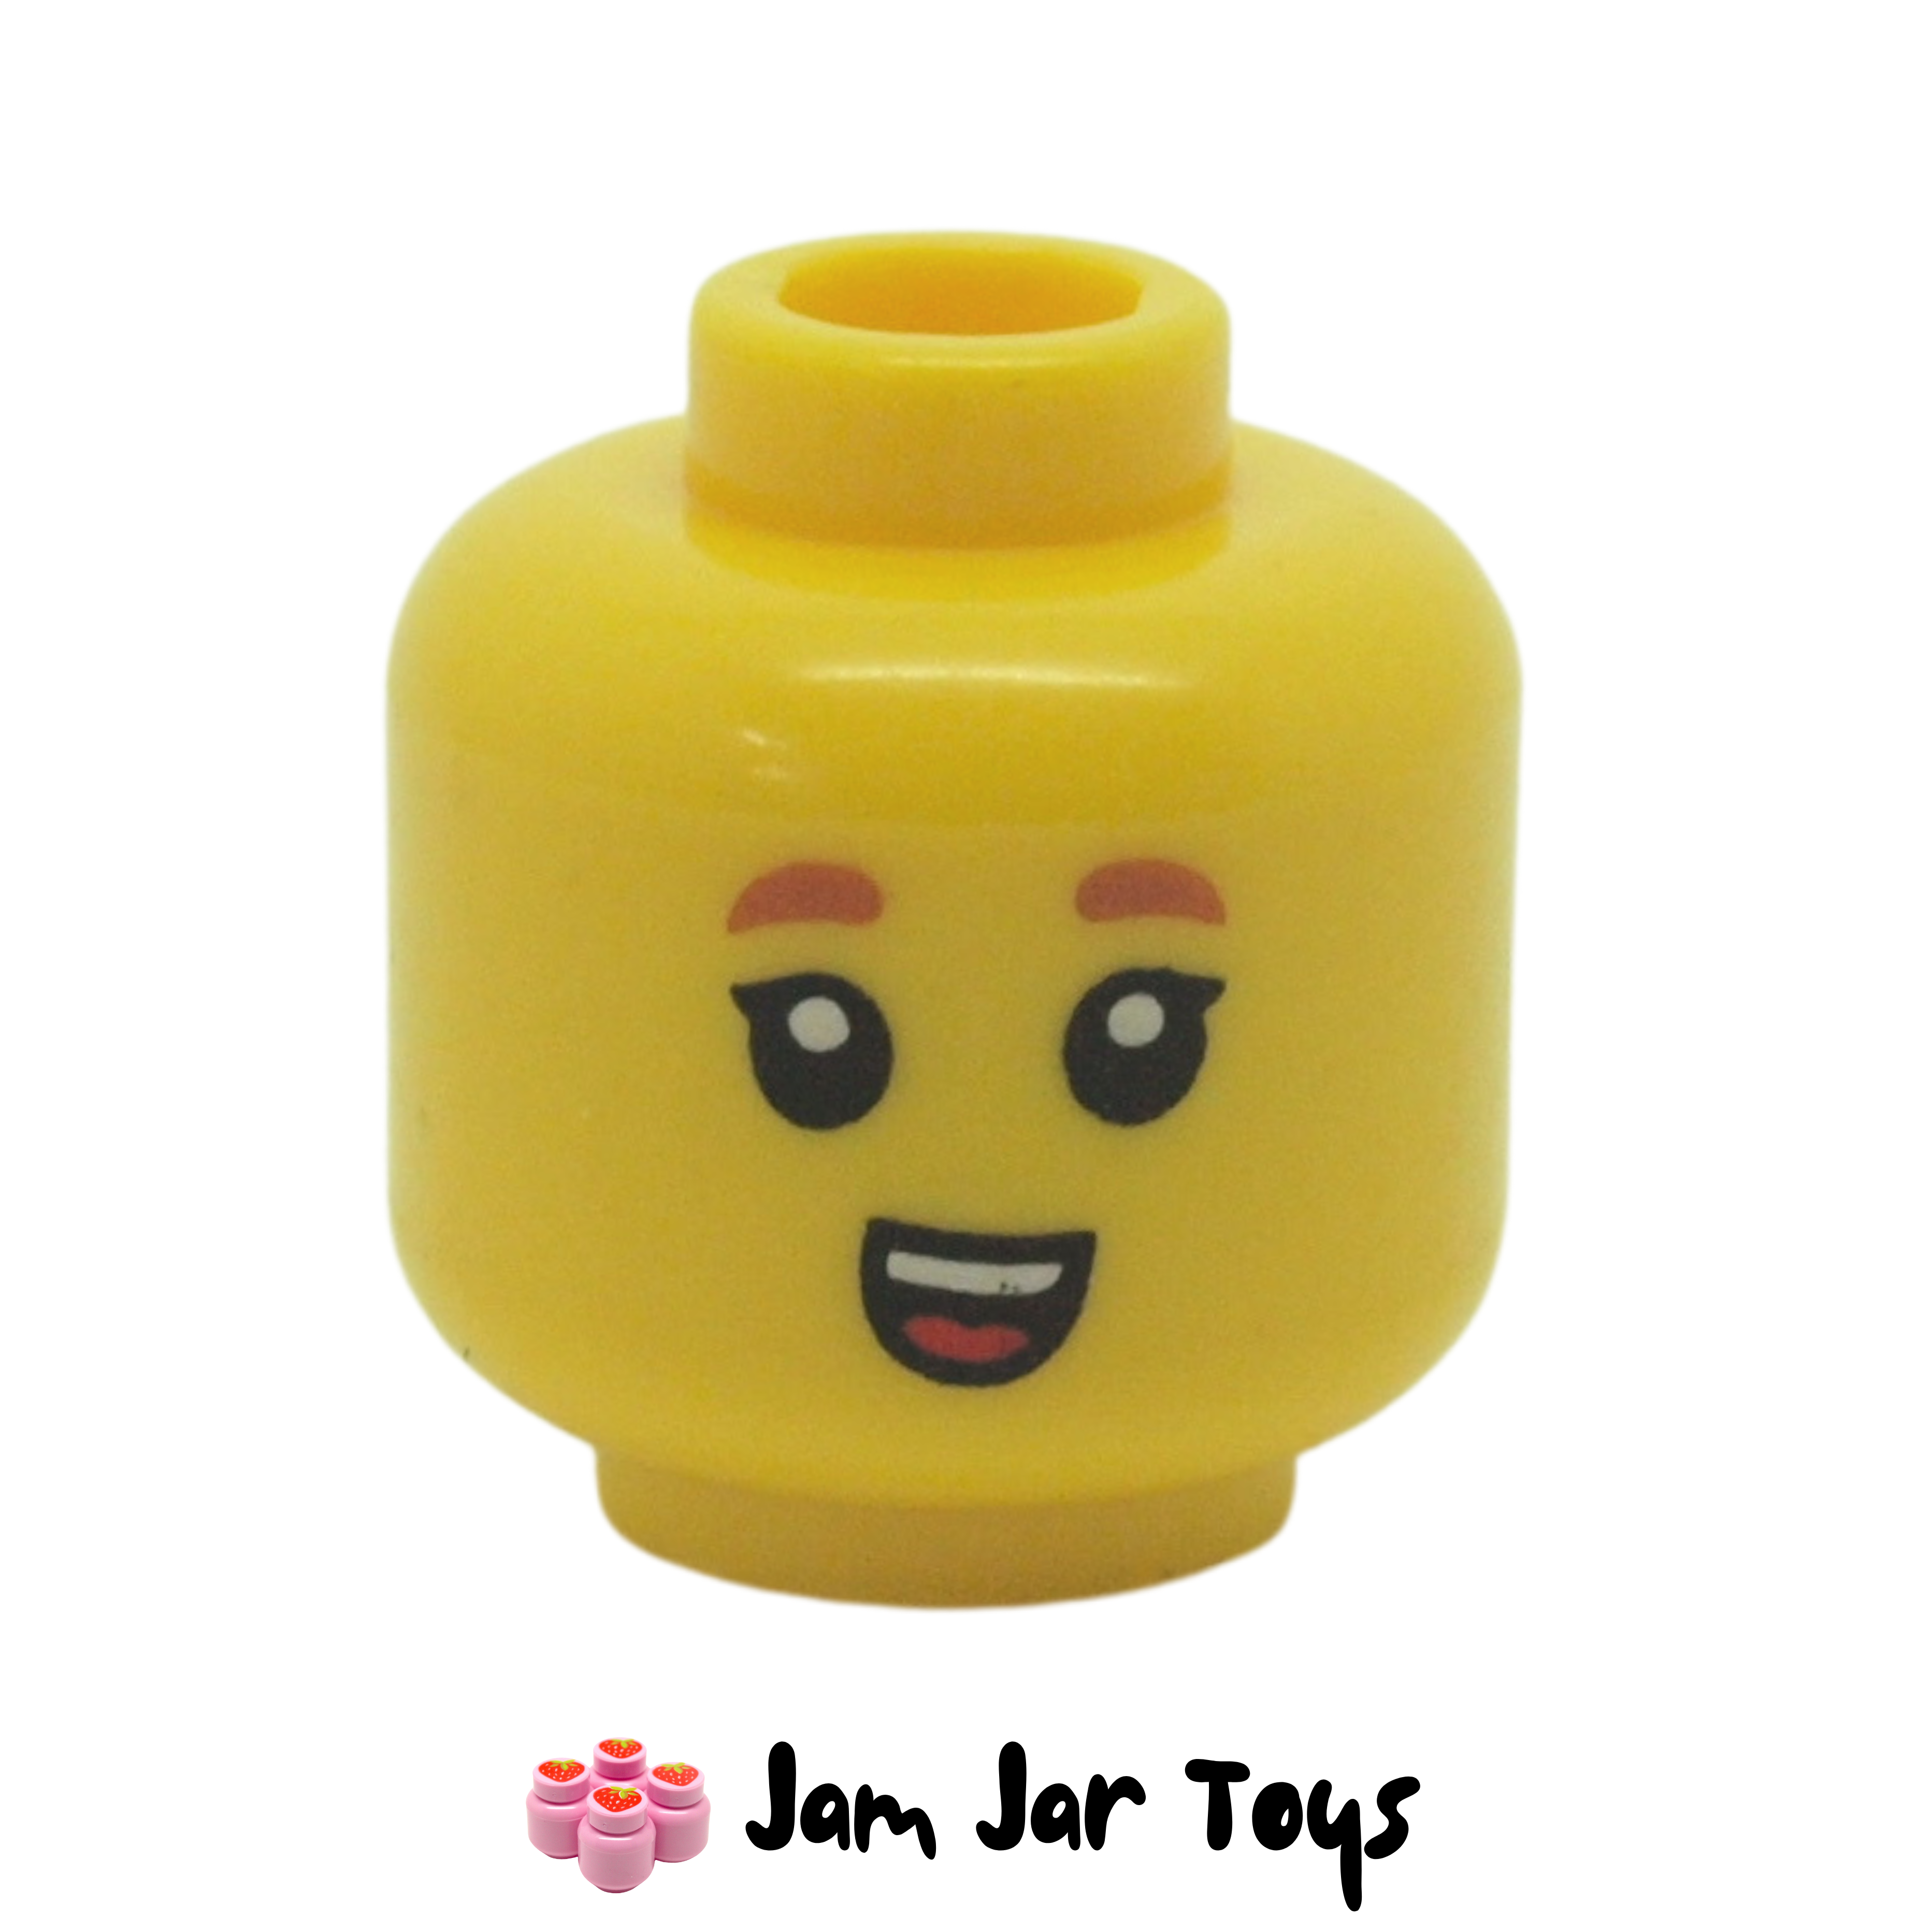 Chin Dimple and Lopsided Grin ☀️NEW Lego Minifigure Head Black Eyebrows 